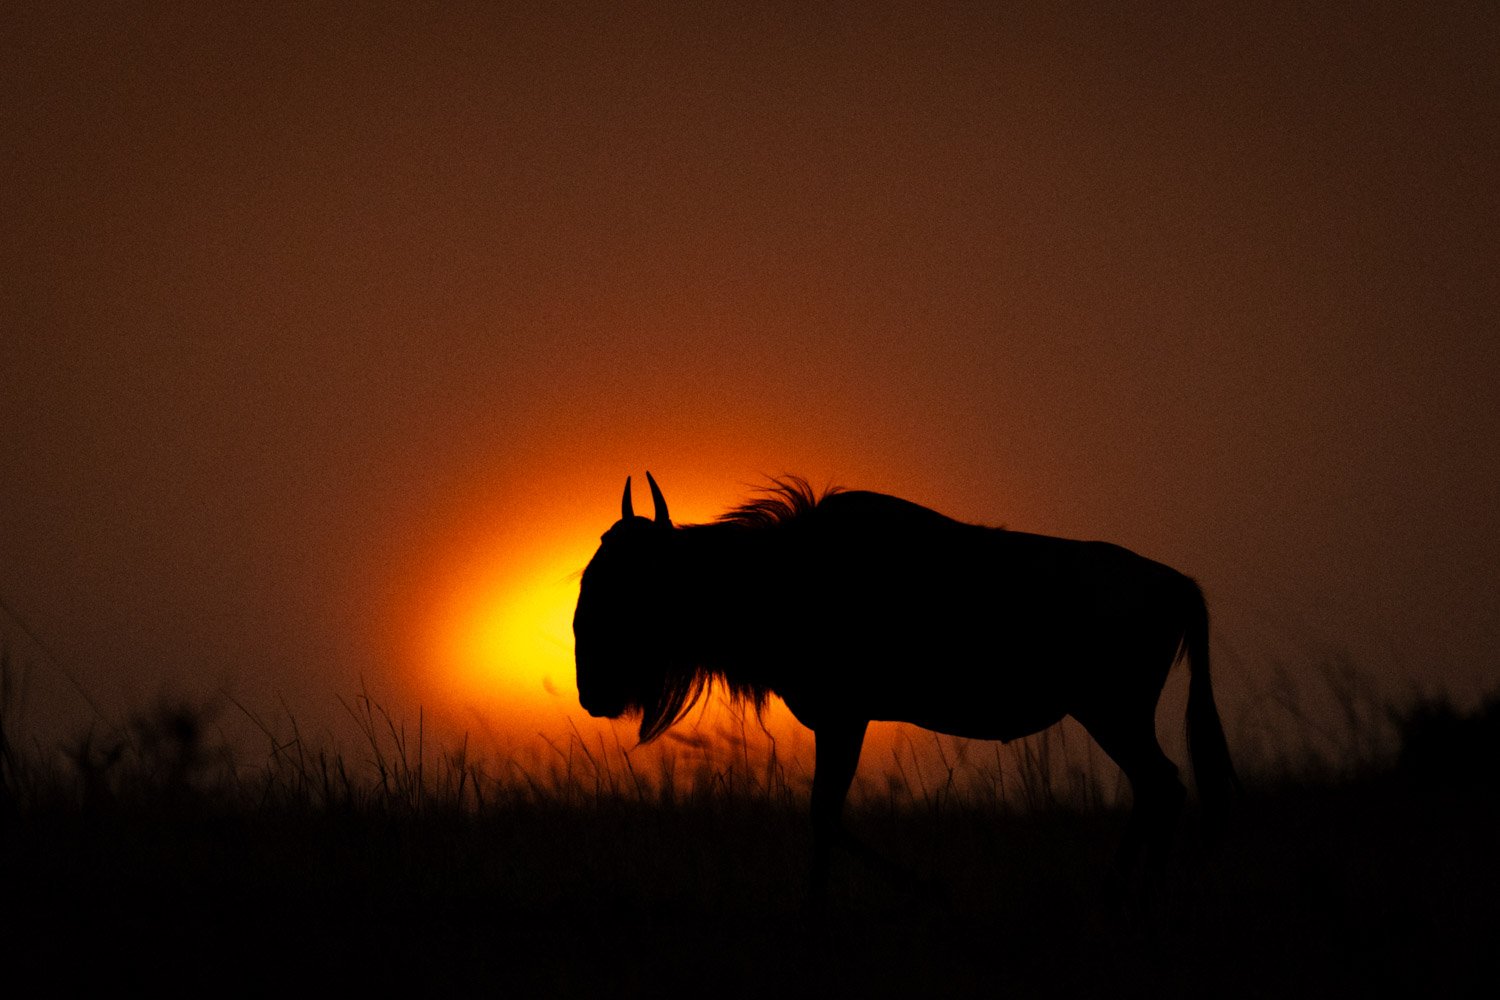 Blue wildebeest stands silhouetted against setting sun